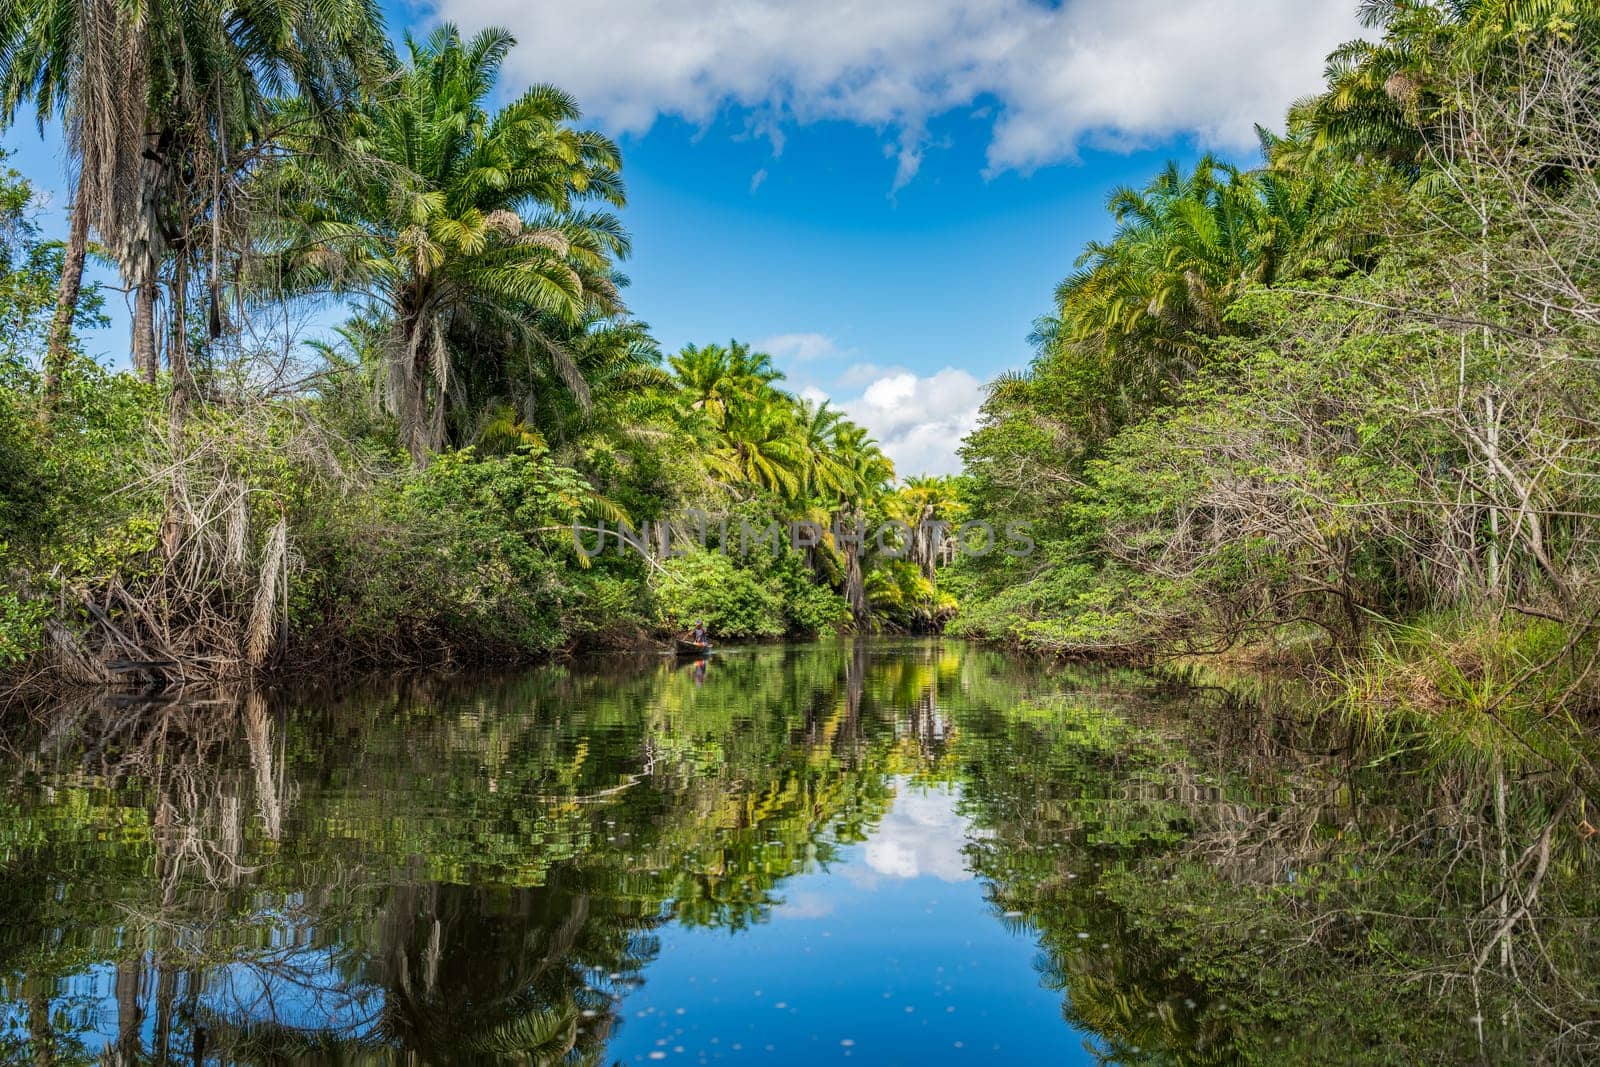 Tropical river reflects lush vegetation and palms, creating a peaceful scene.